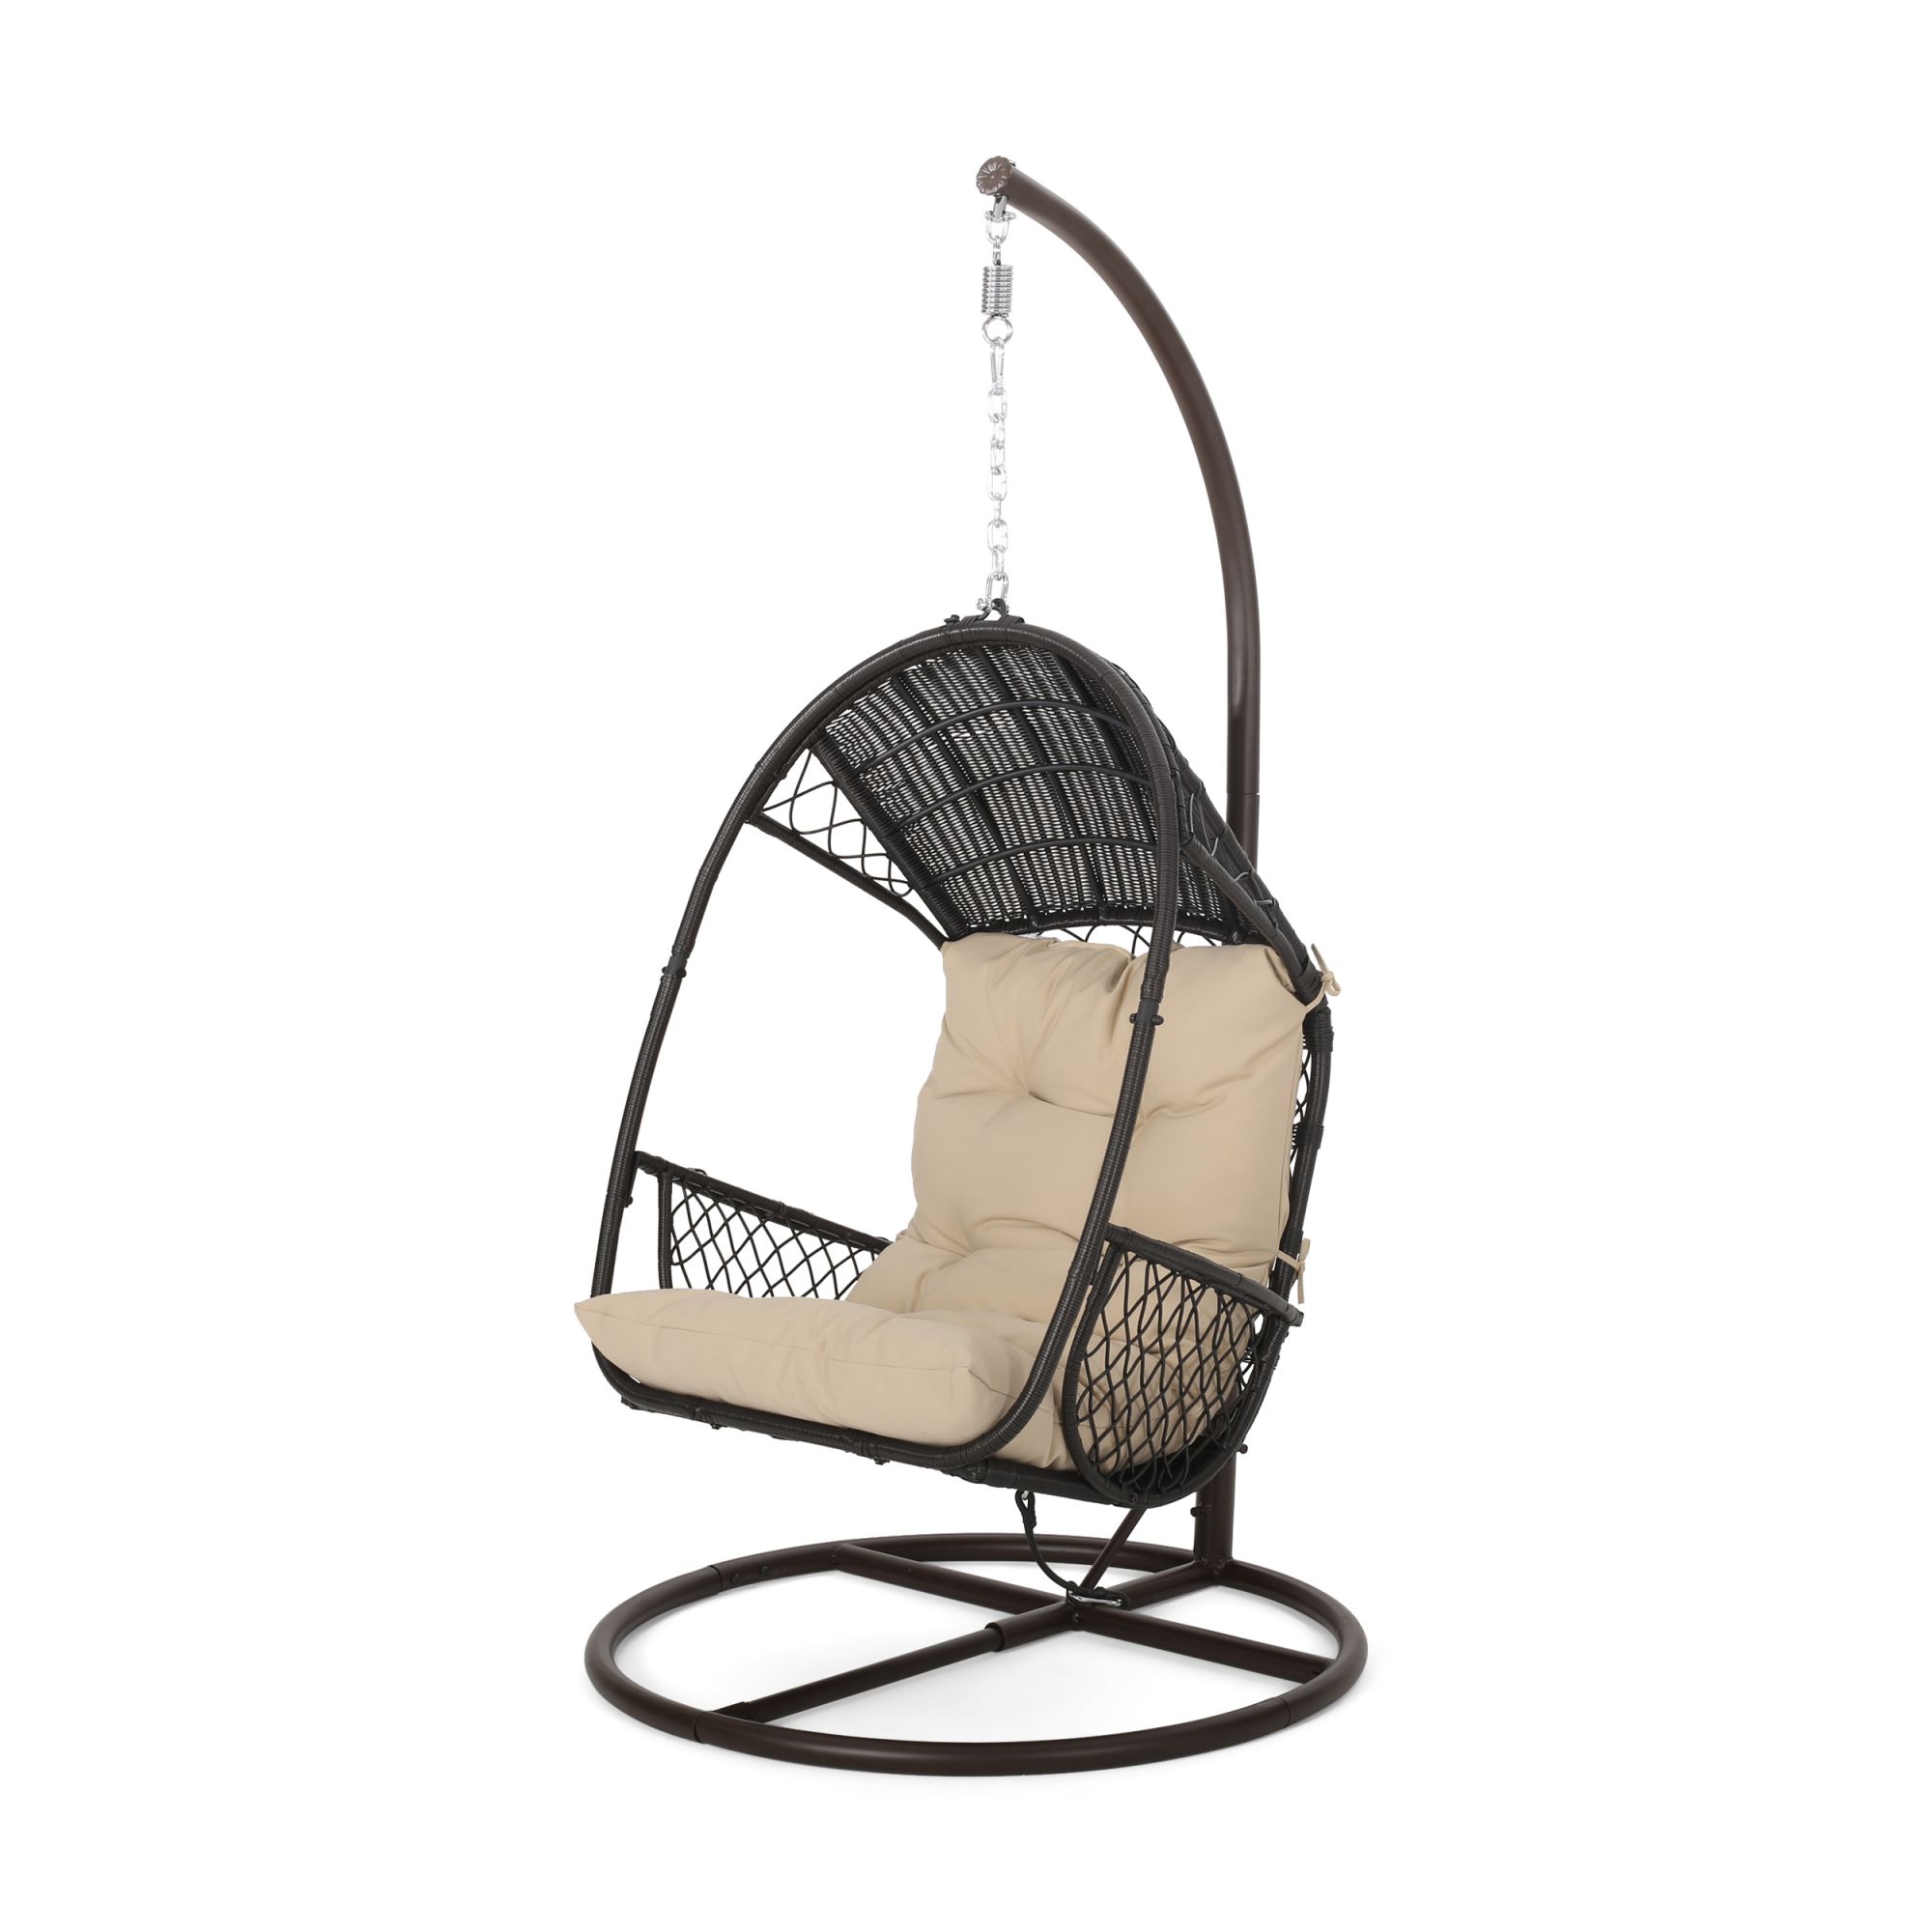 https://www.homethreads.com/files/noble-house/311860-malia-wicker-hanging-chair-with-stand-brown-and-tan-1.jpg